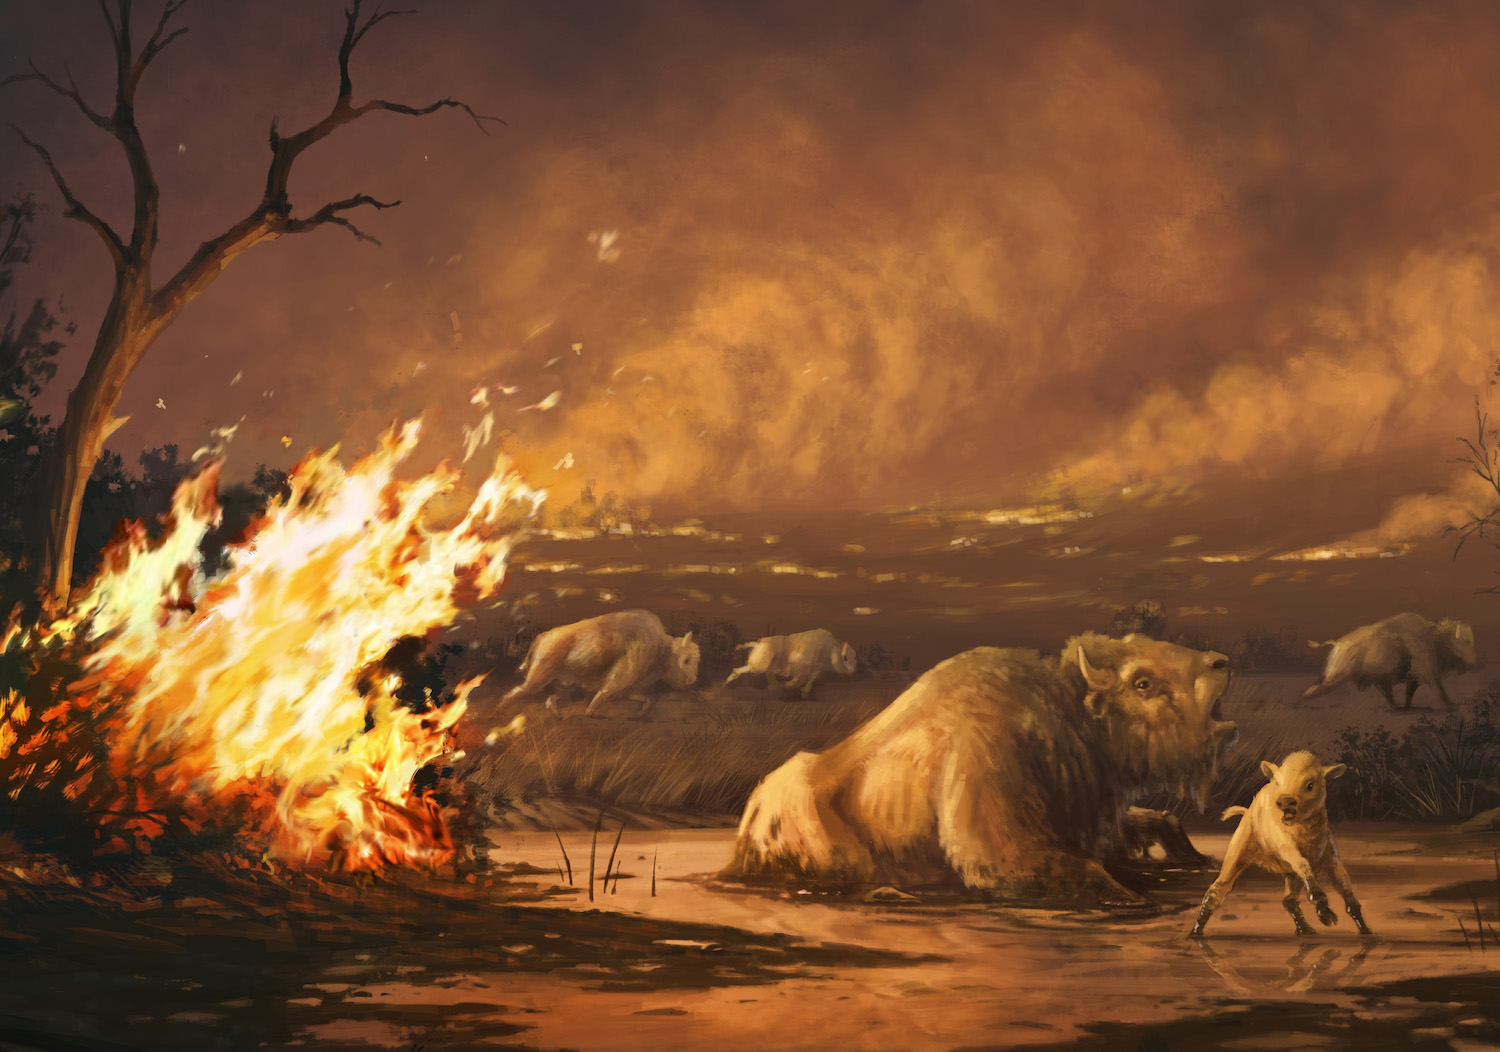 Illustration of bison entrapped in asphalt as wildfires rage at the end of the last ice age